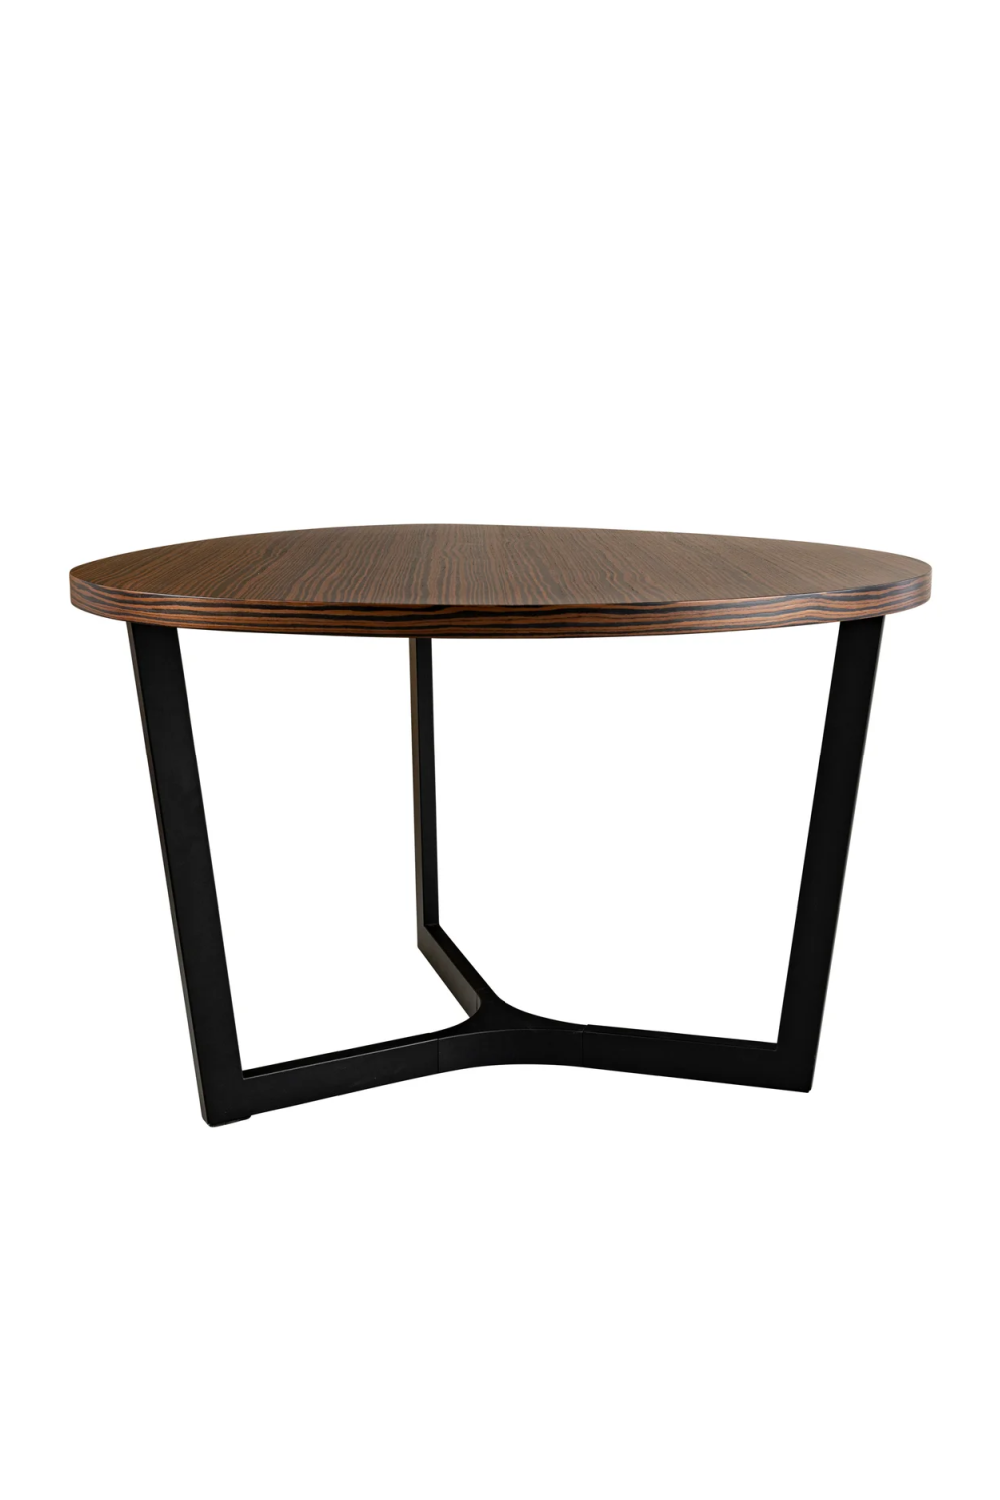 Wooden Dining Table | Dome Deco Java | Oroa.com